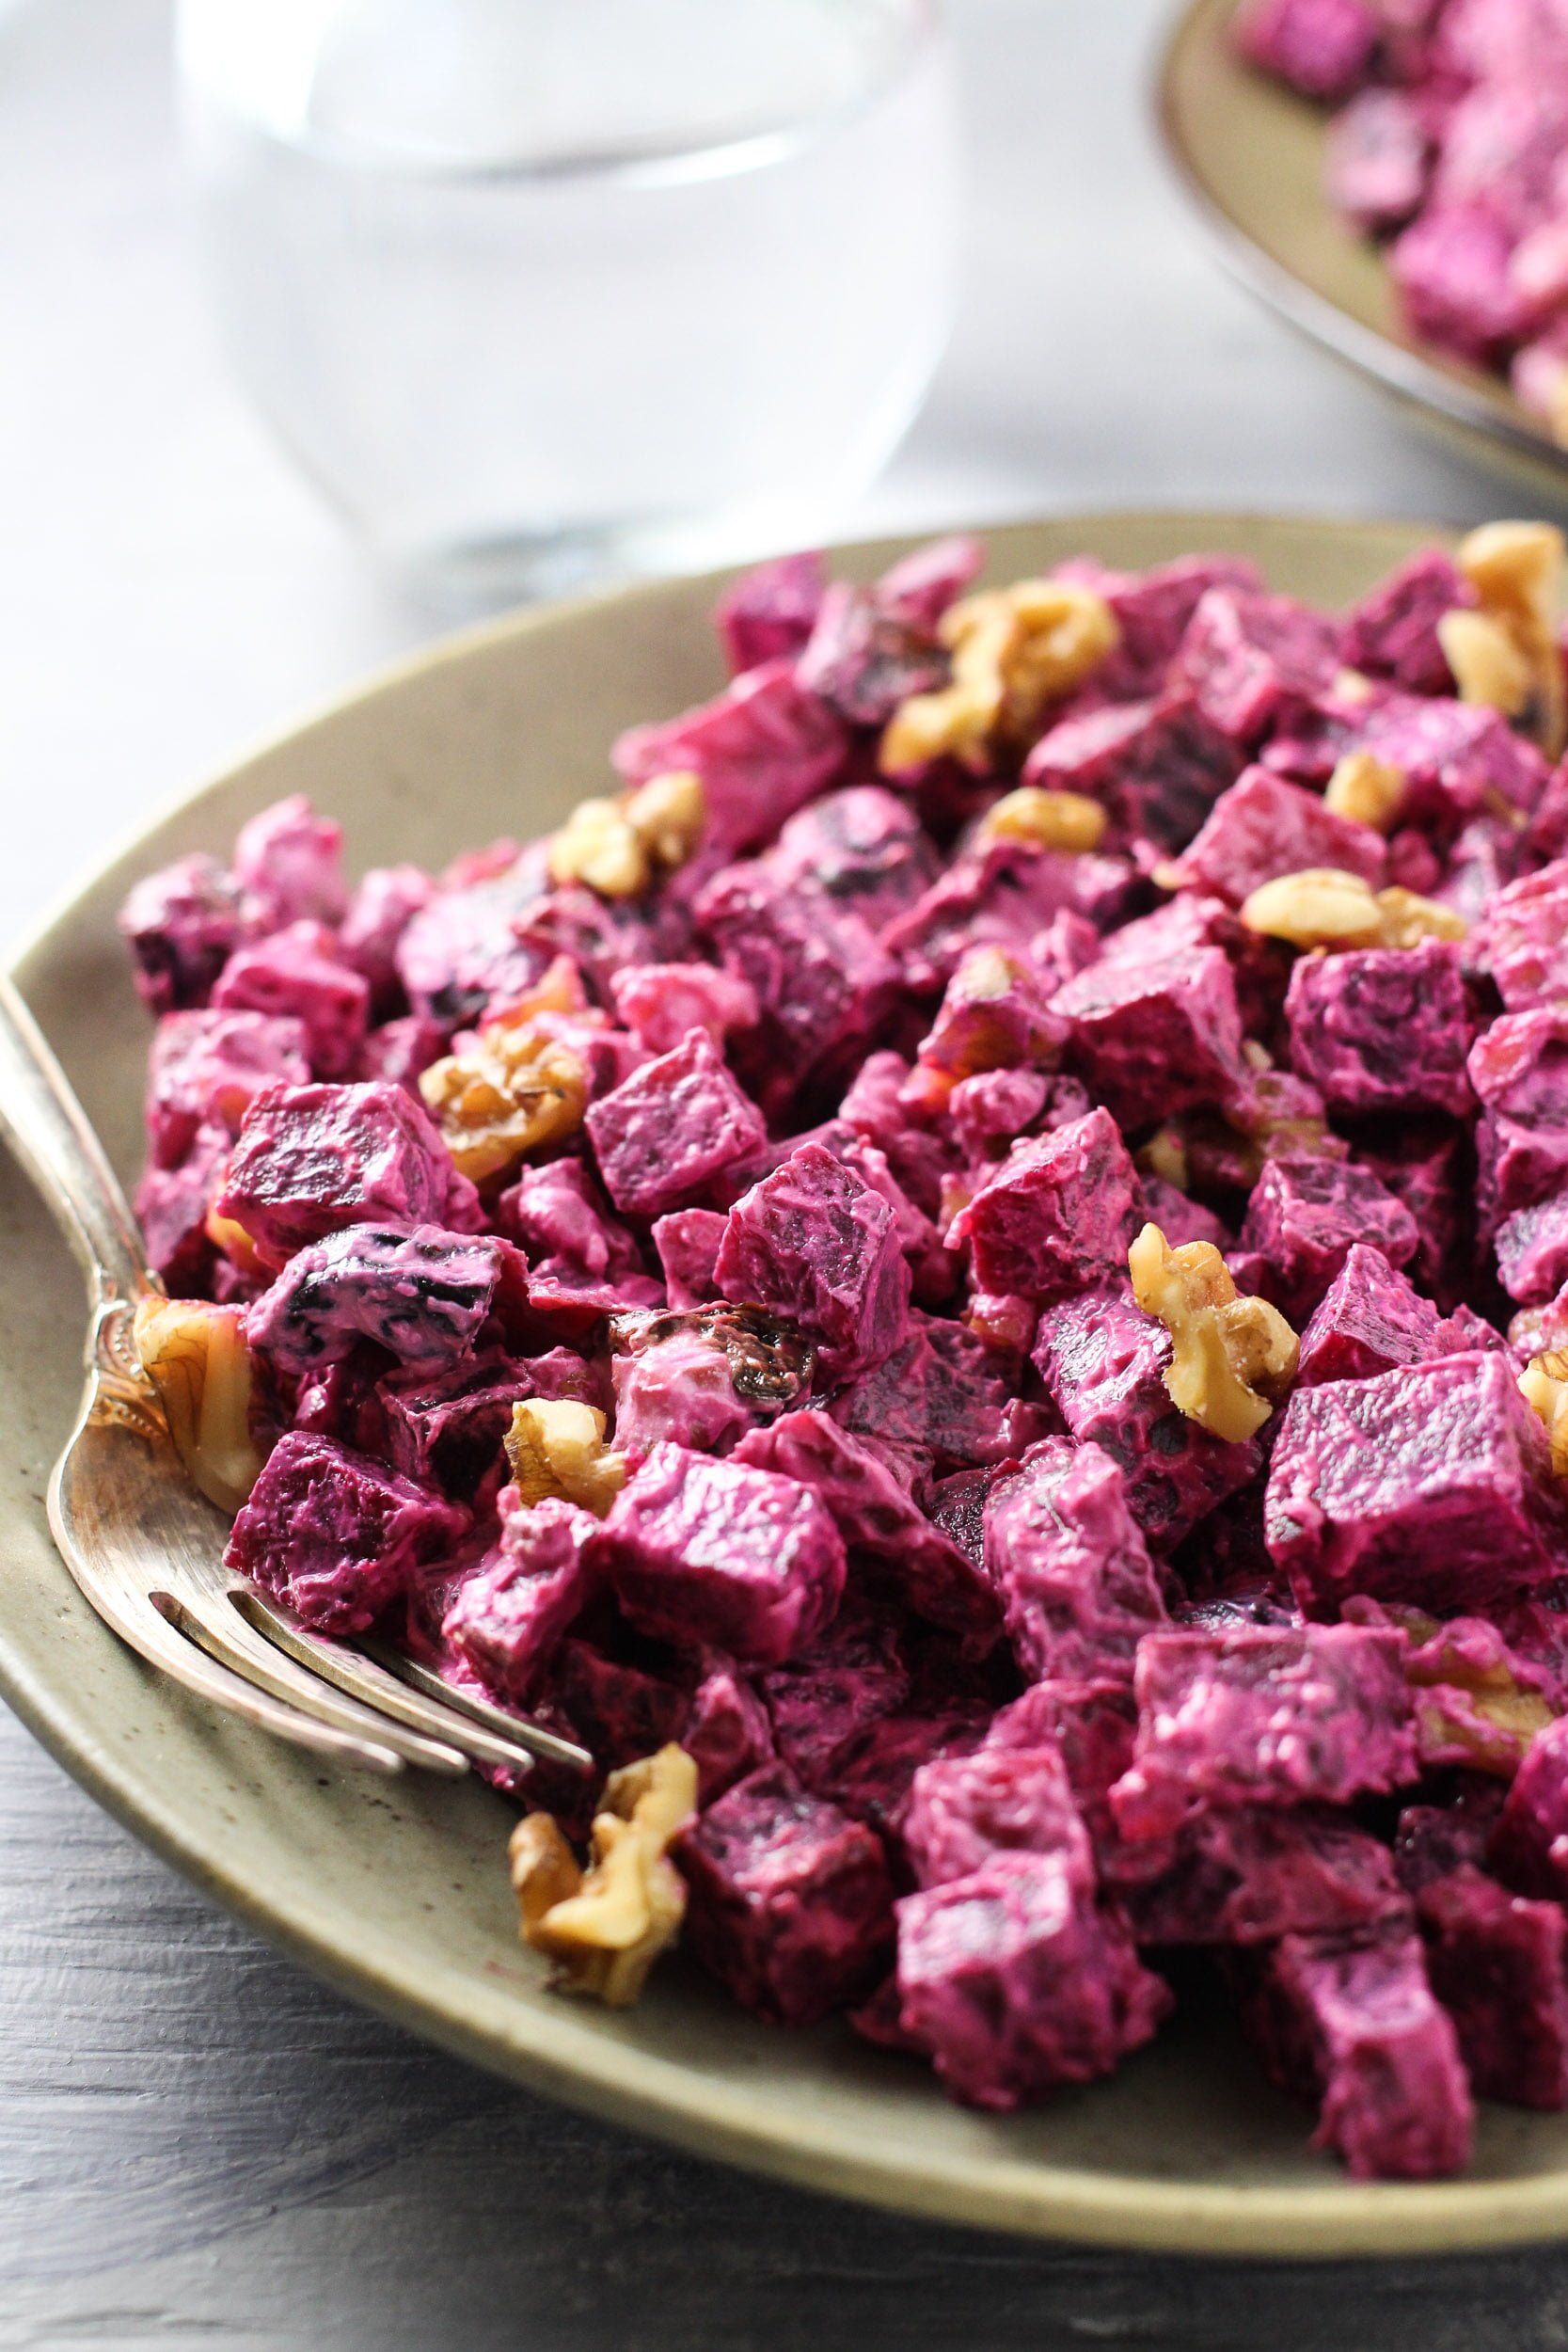 Beet salad with walnuts on a plate.